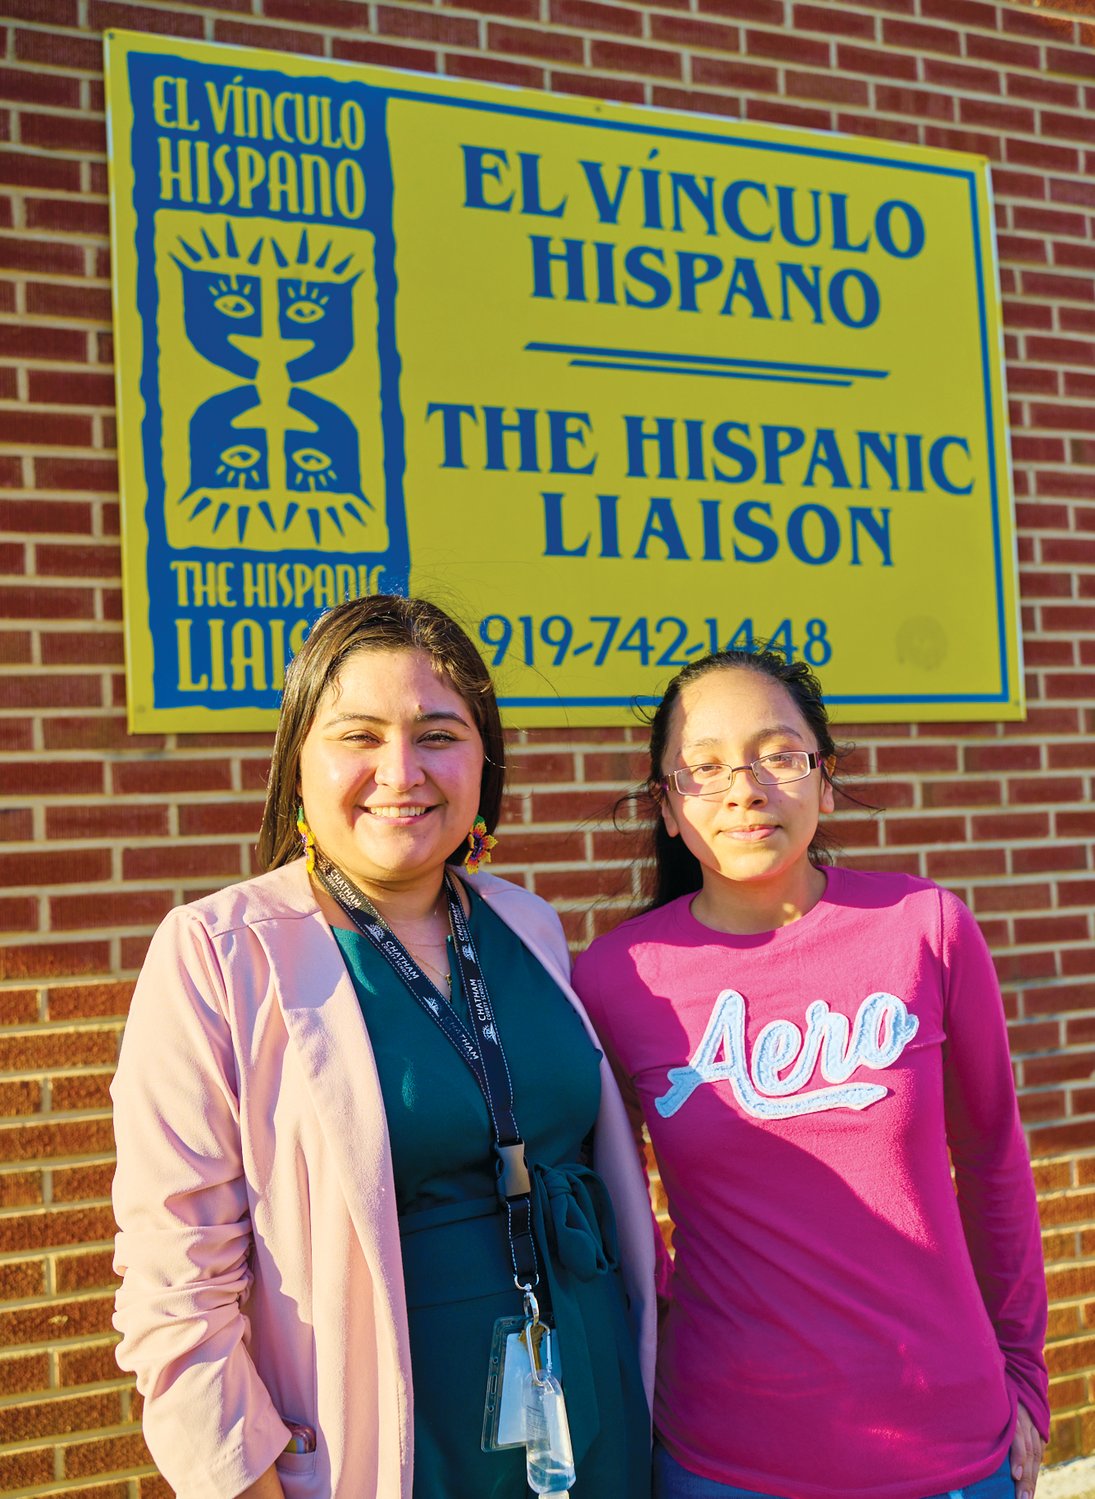 J-M senior Evelin Muñoz Tebalan (right) with the Hispanic Liaison's Selina Lopez, youth program director of Orgullo Latinx Pride. 'I'm also really excited to see where she goes, ‘cause she's just gonna be soaring,' Lopez said of Muñoz Tebalan.